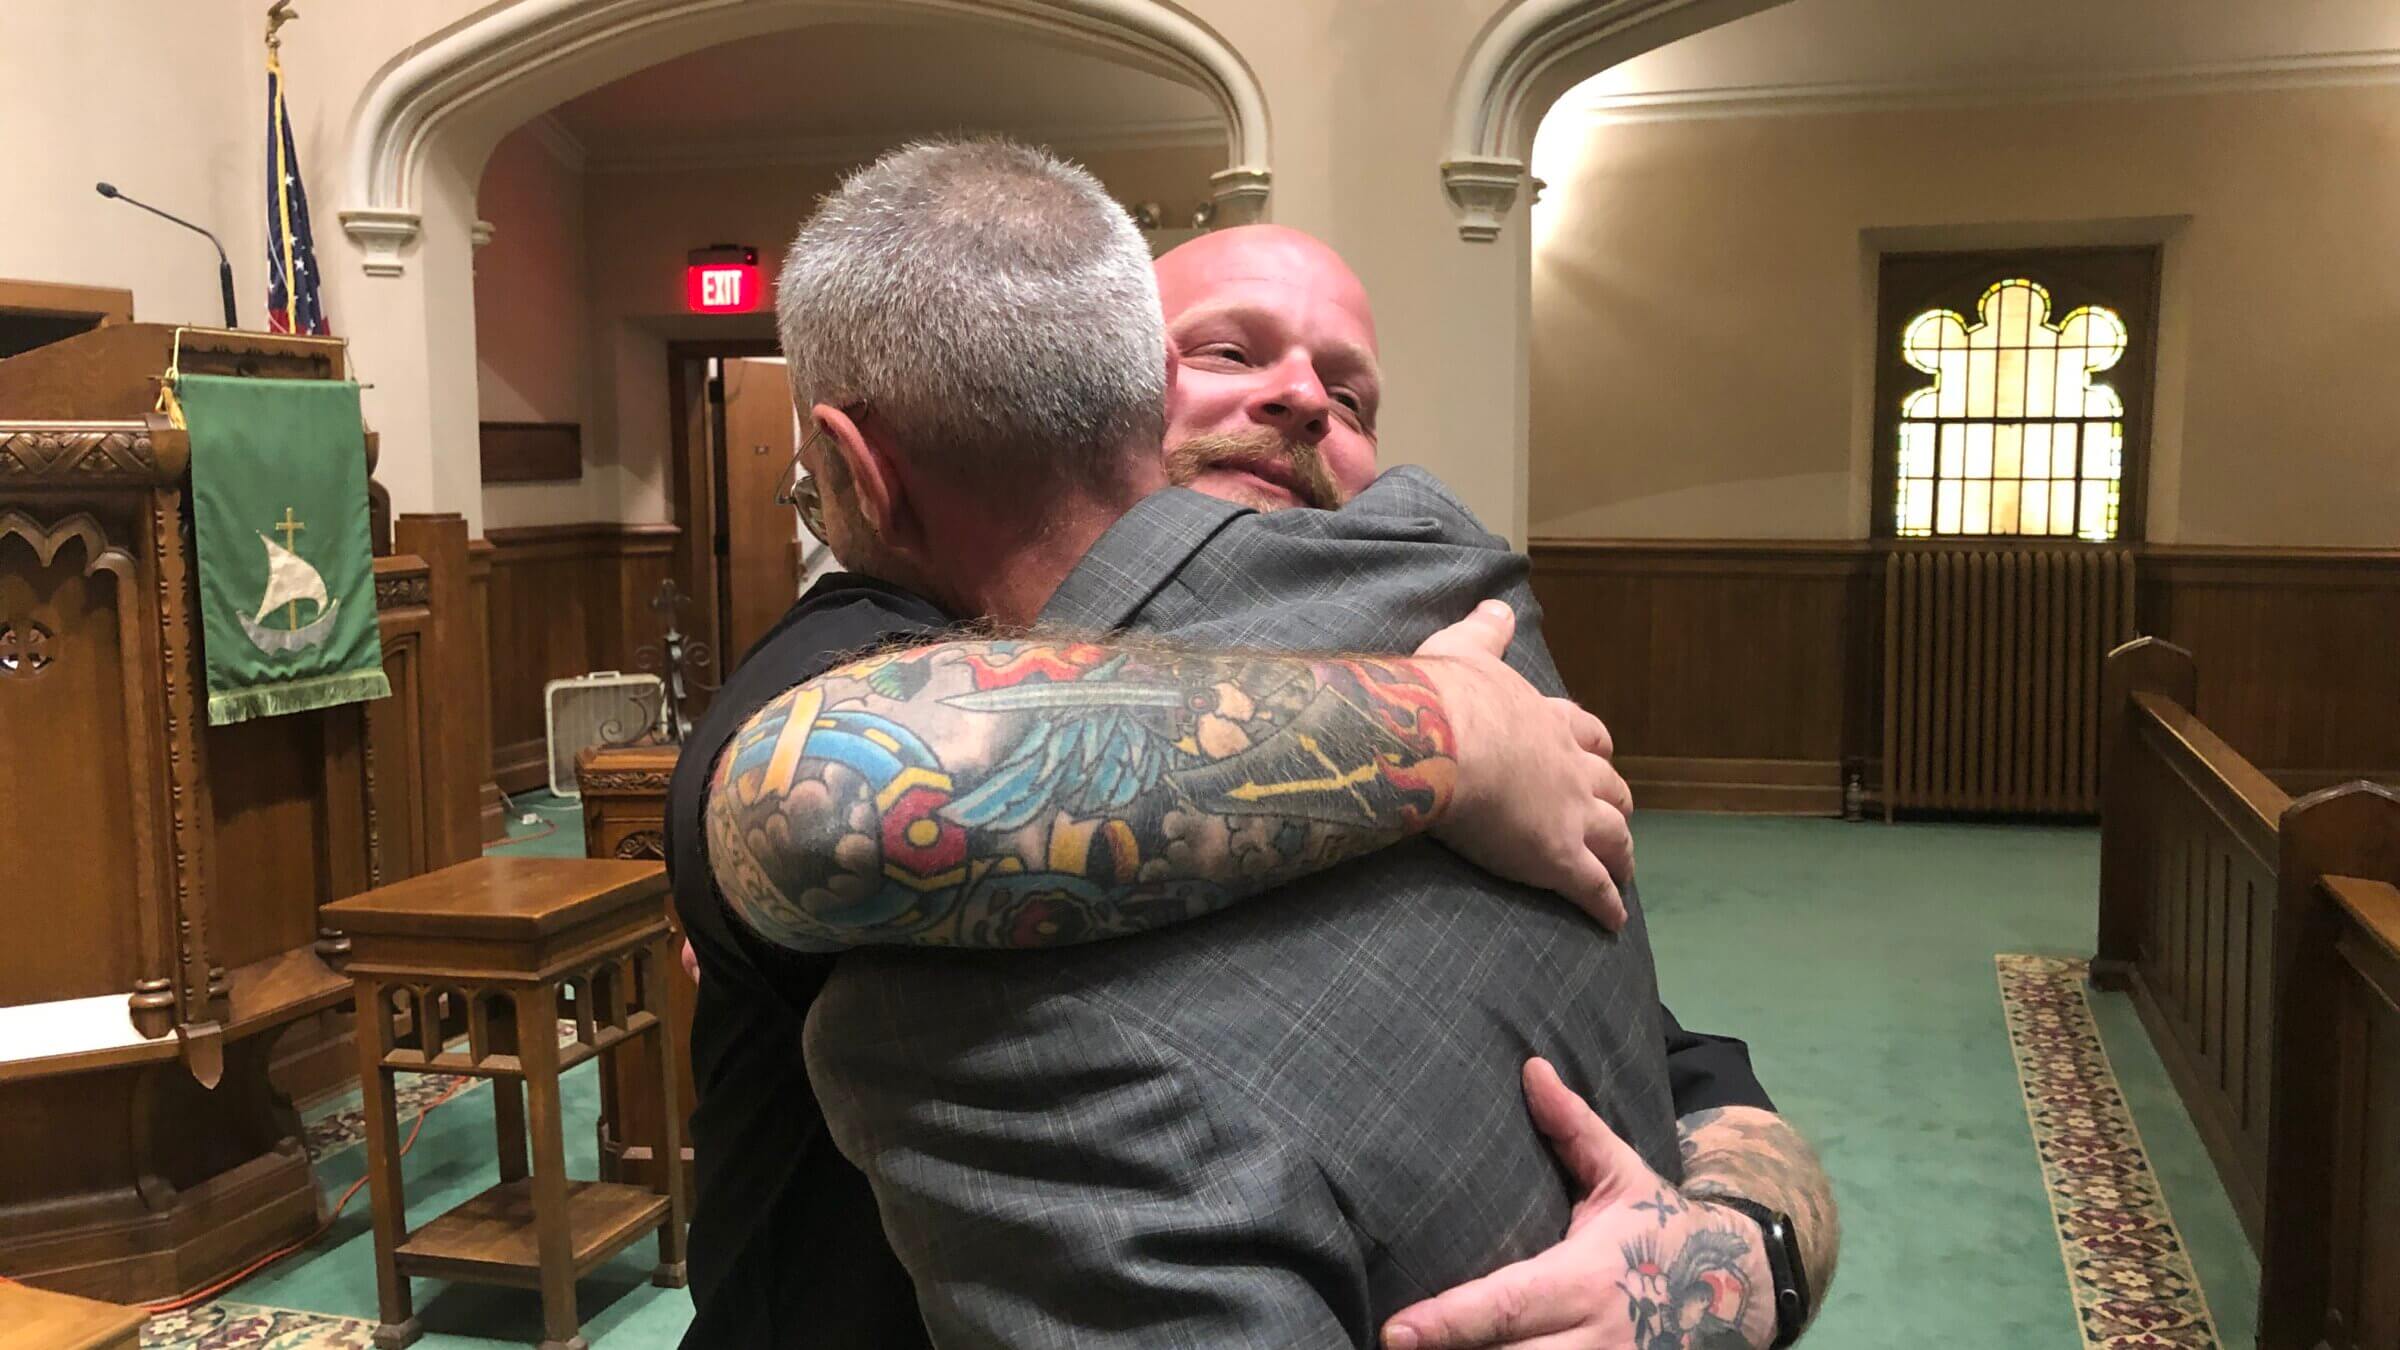 The Rev. Quincy Worthington of the Highland Park Presbyterian Church, hugs event co-planner the Rev. Bryan Cones of Trinity Episcopal Church at the conclusion of the inter-religious community vigil Tuesday night.